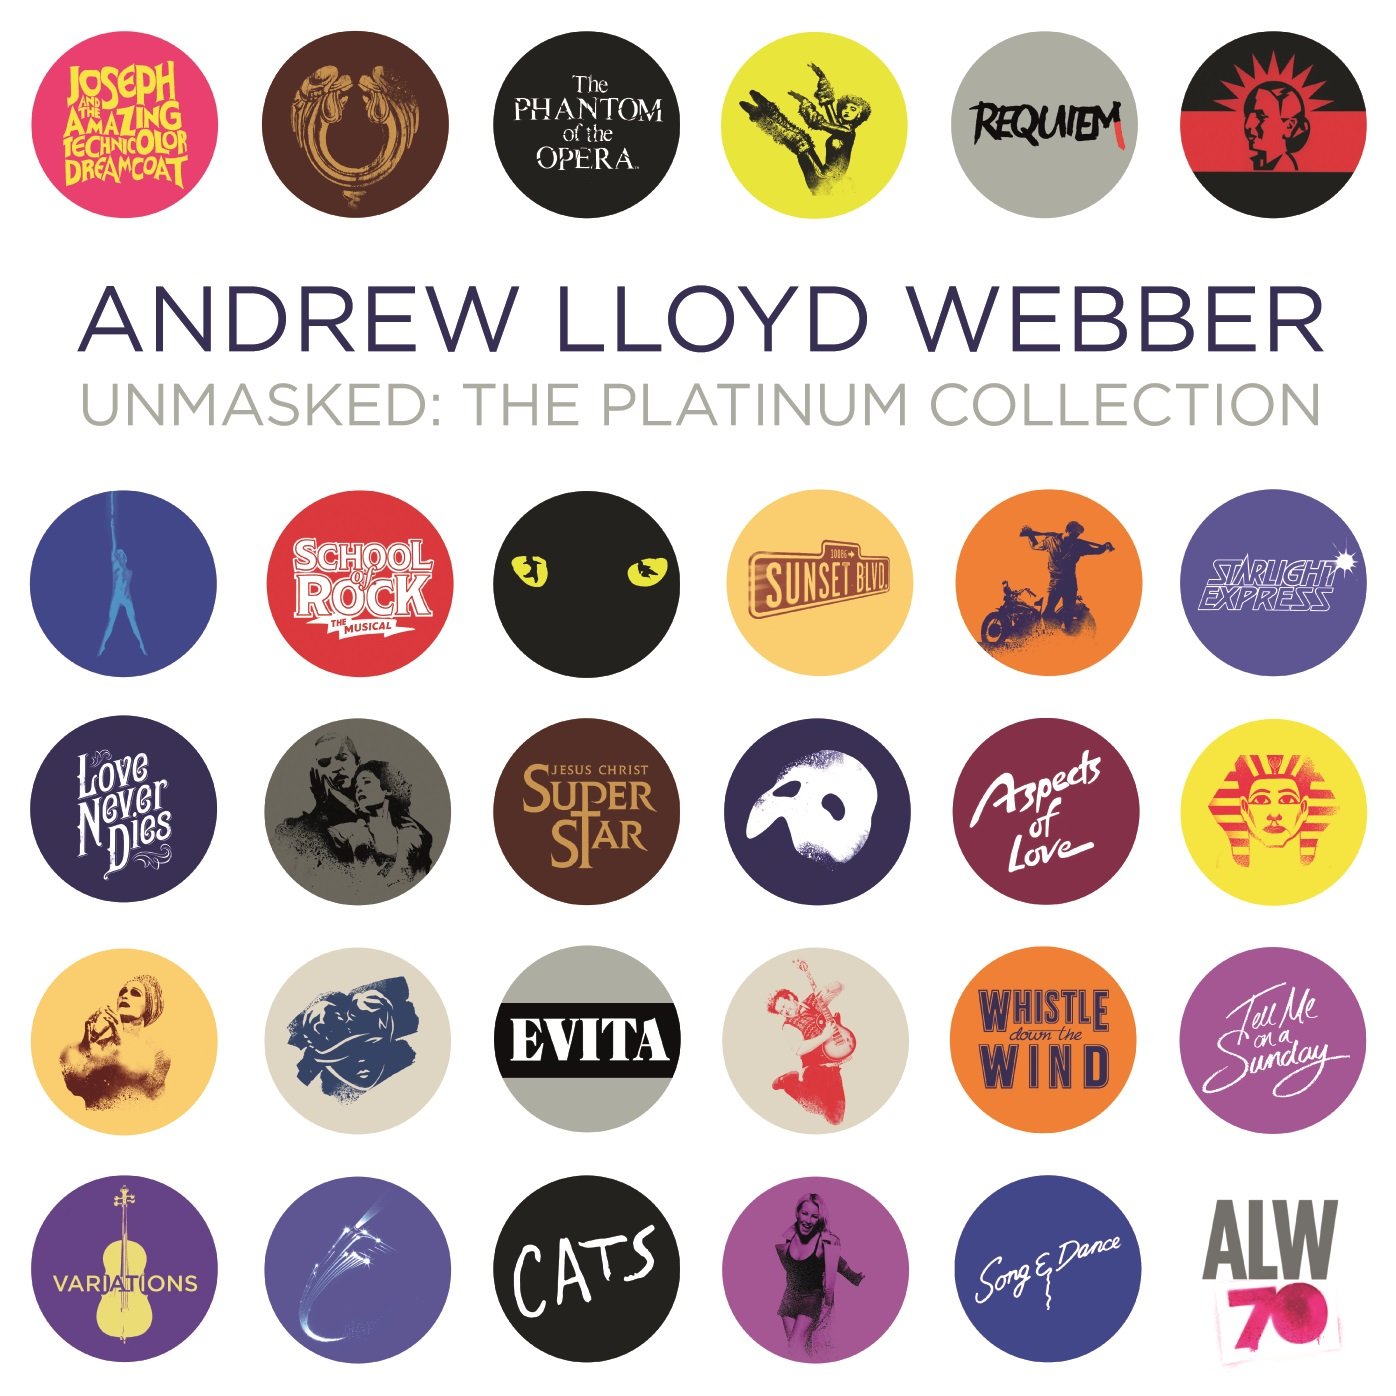 ANDREW LLOYD WEBBER: THE PLATINUM COLLECTION (2 CDs)